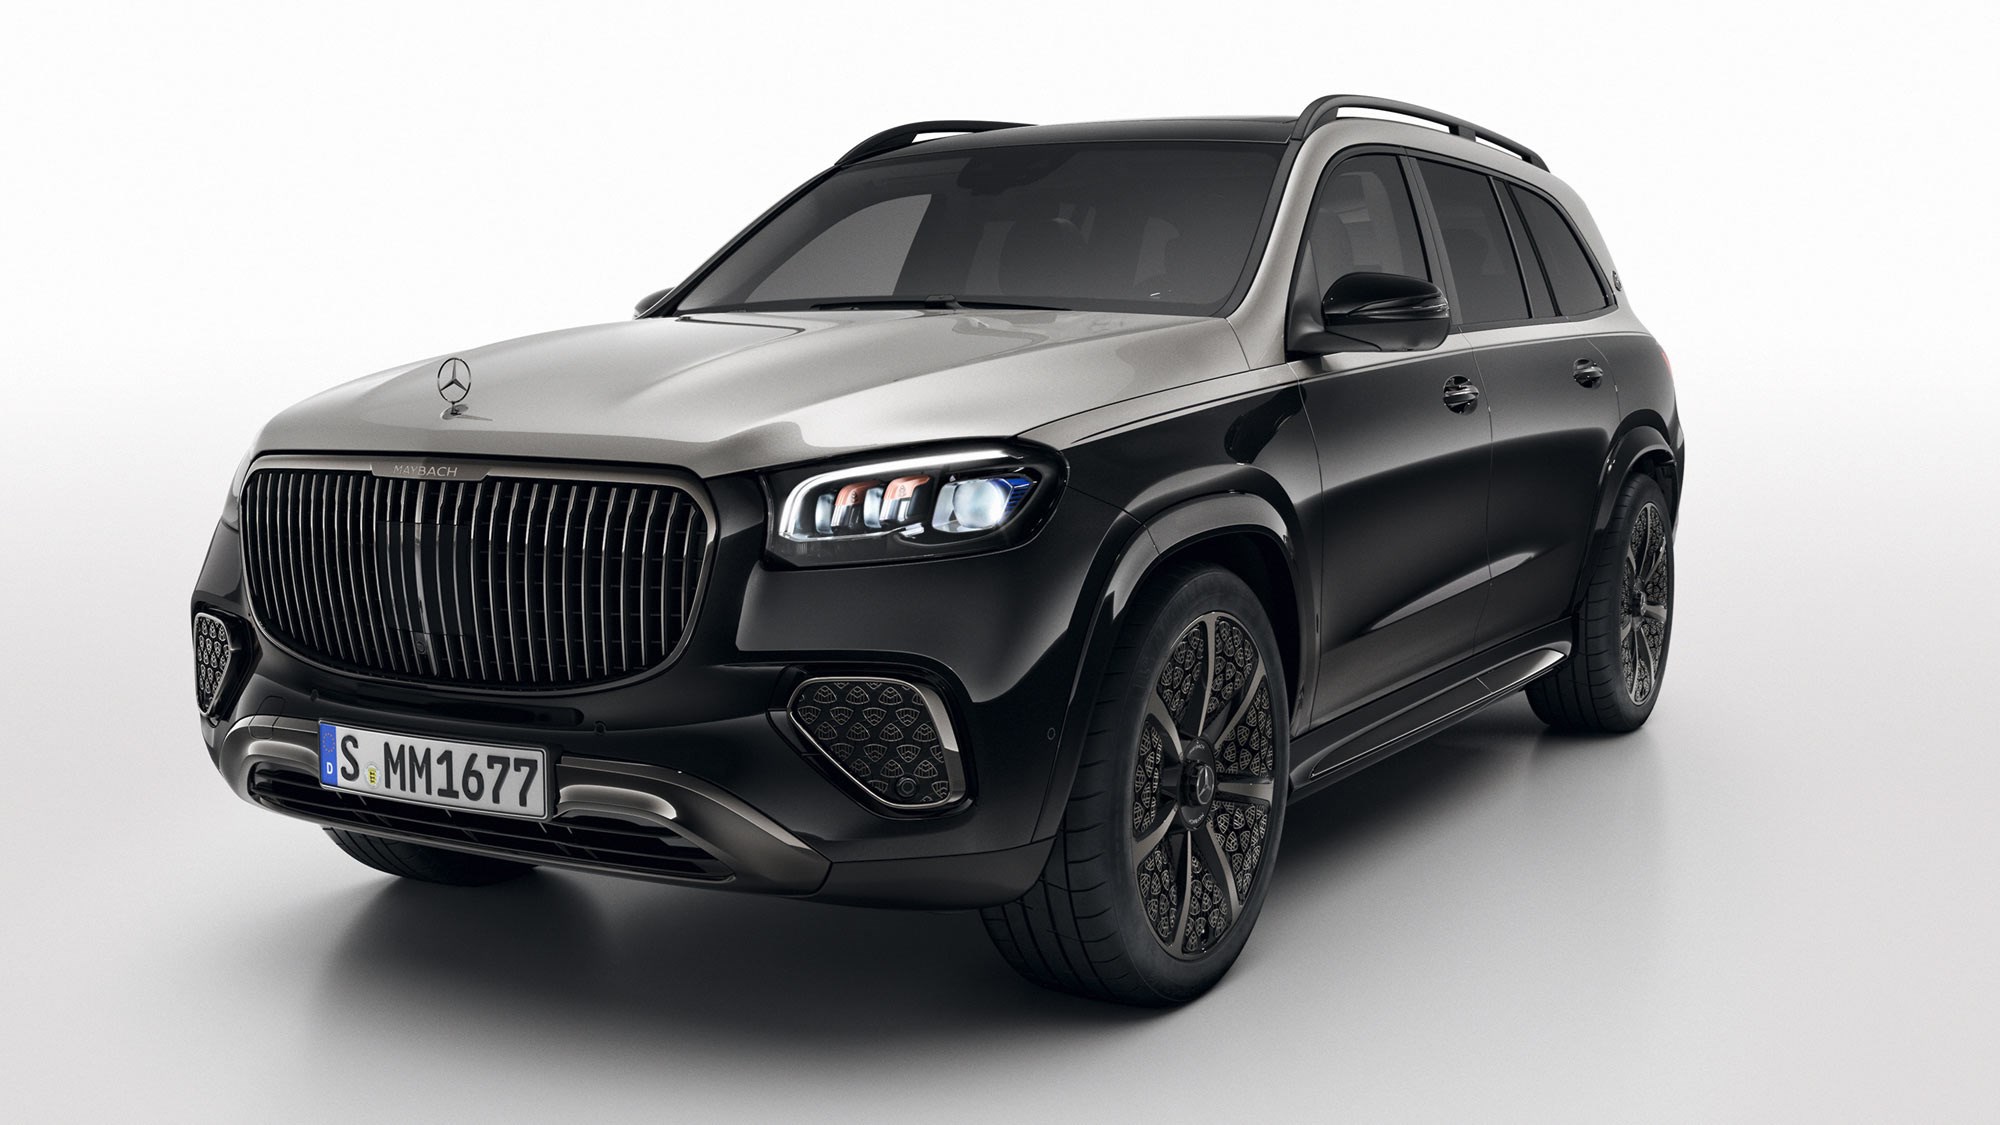 https://car-images.bauersecure.com/wp-images/162976/76-mercedes-maybach-night-series-gls-front.jpg